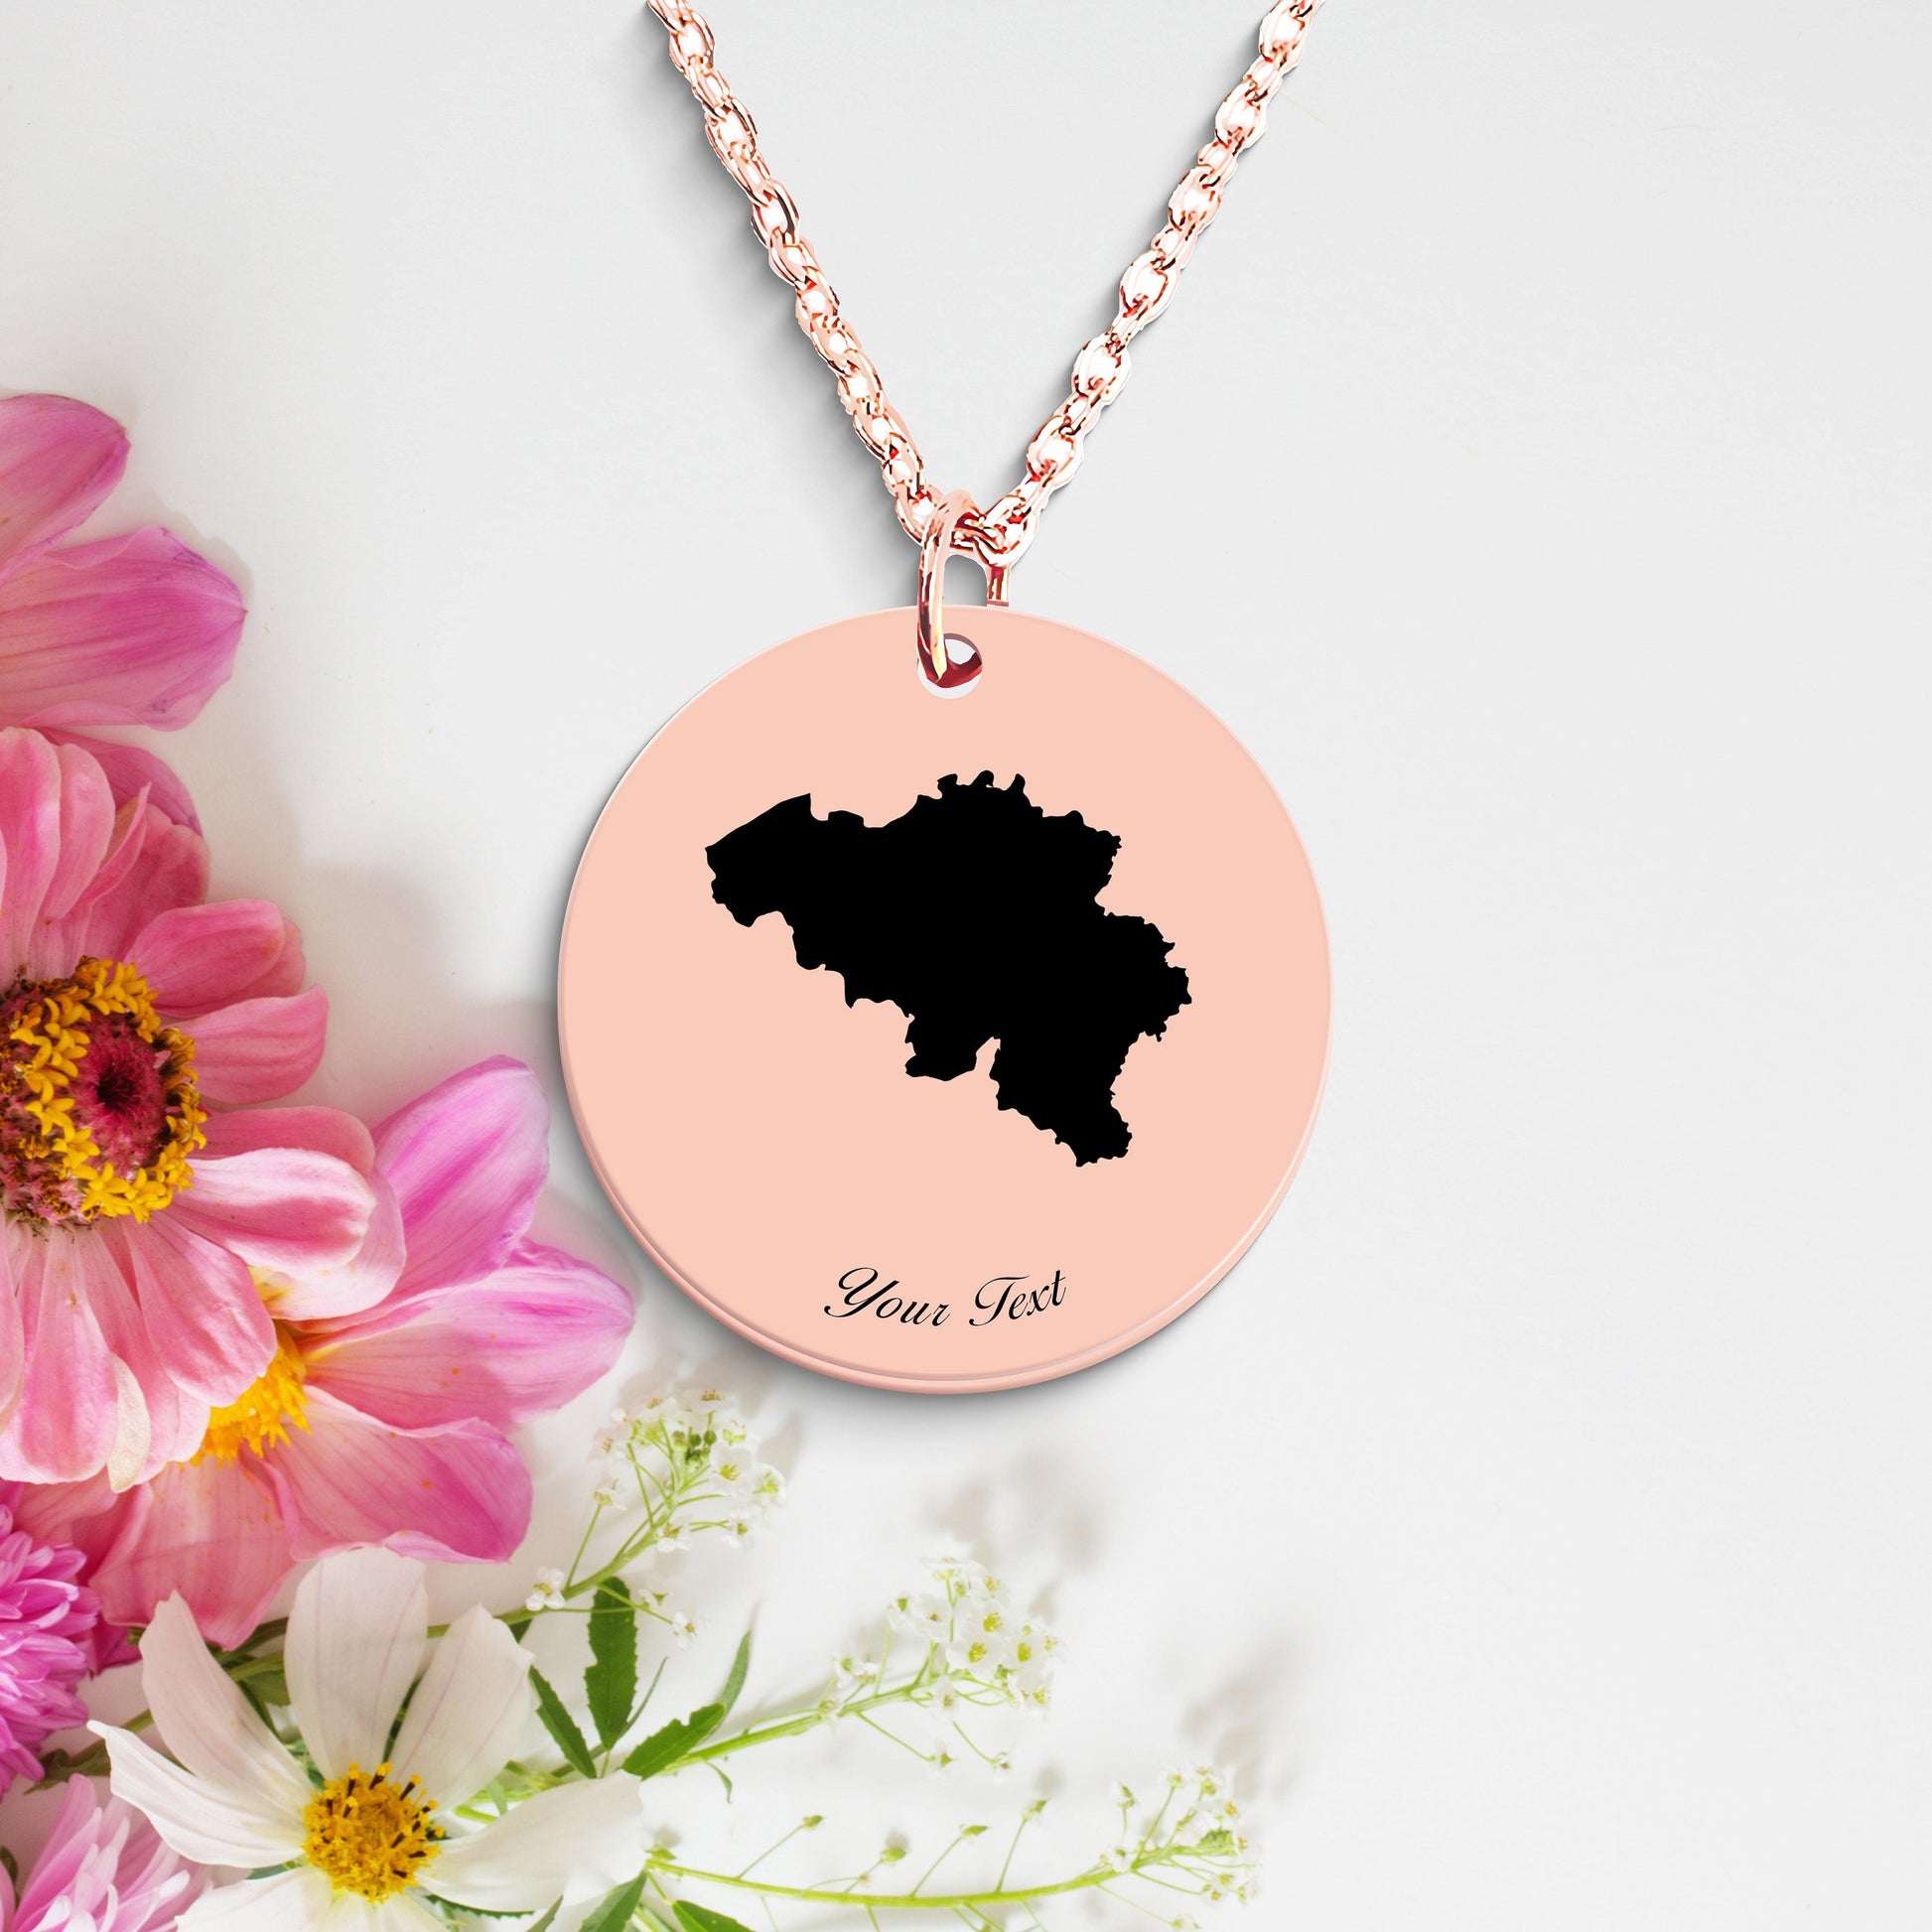 Belgium Country Map Necklace, Your Name Necklace, Minimalist Necklace, Personalized Gift, Silver Necklace, Gift For Him Her